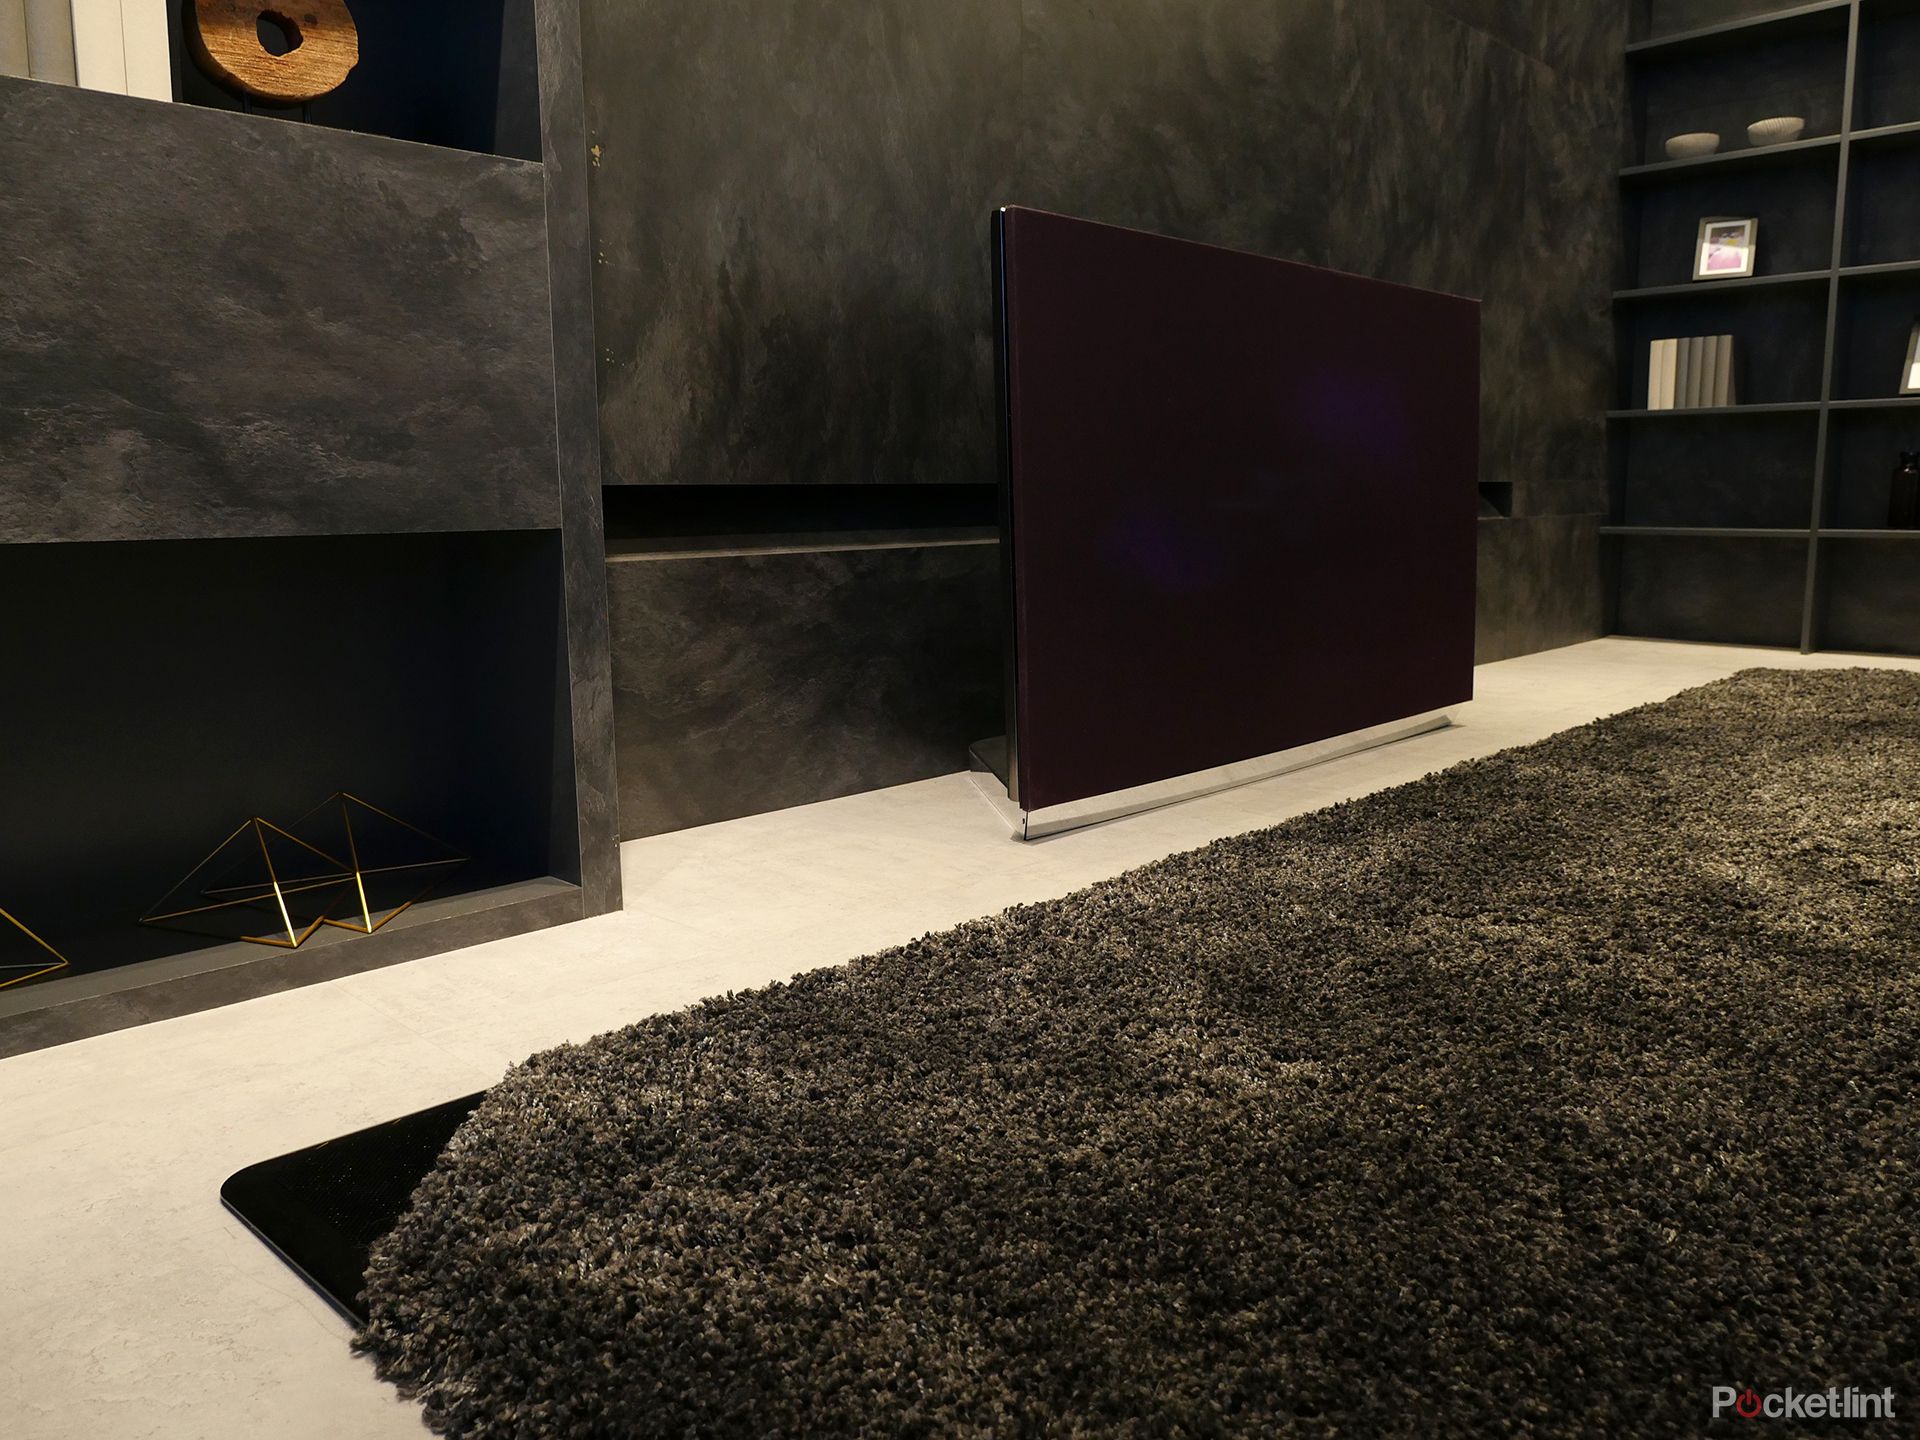 panasonic has invented a surround sound rug yes you read that right image 1